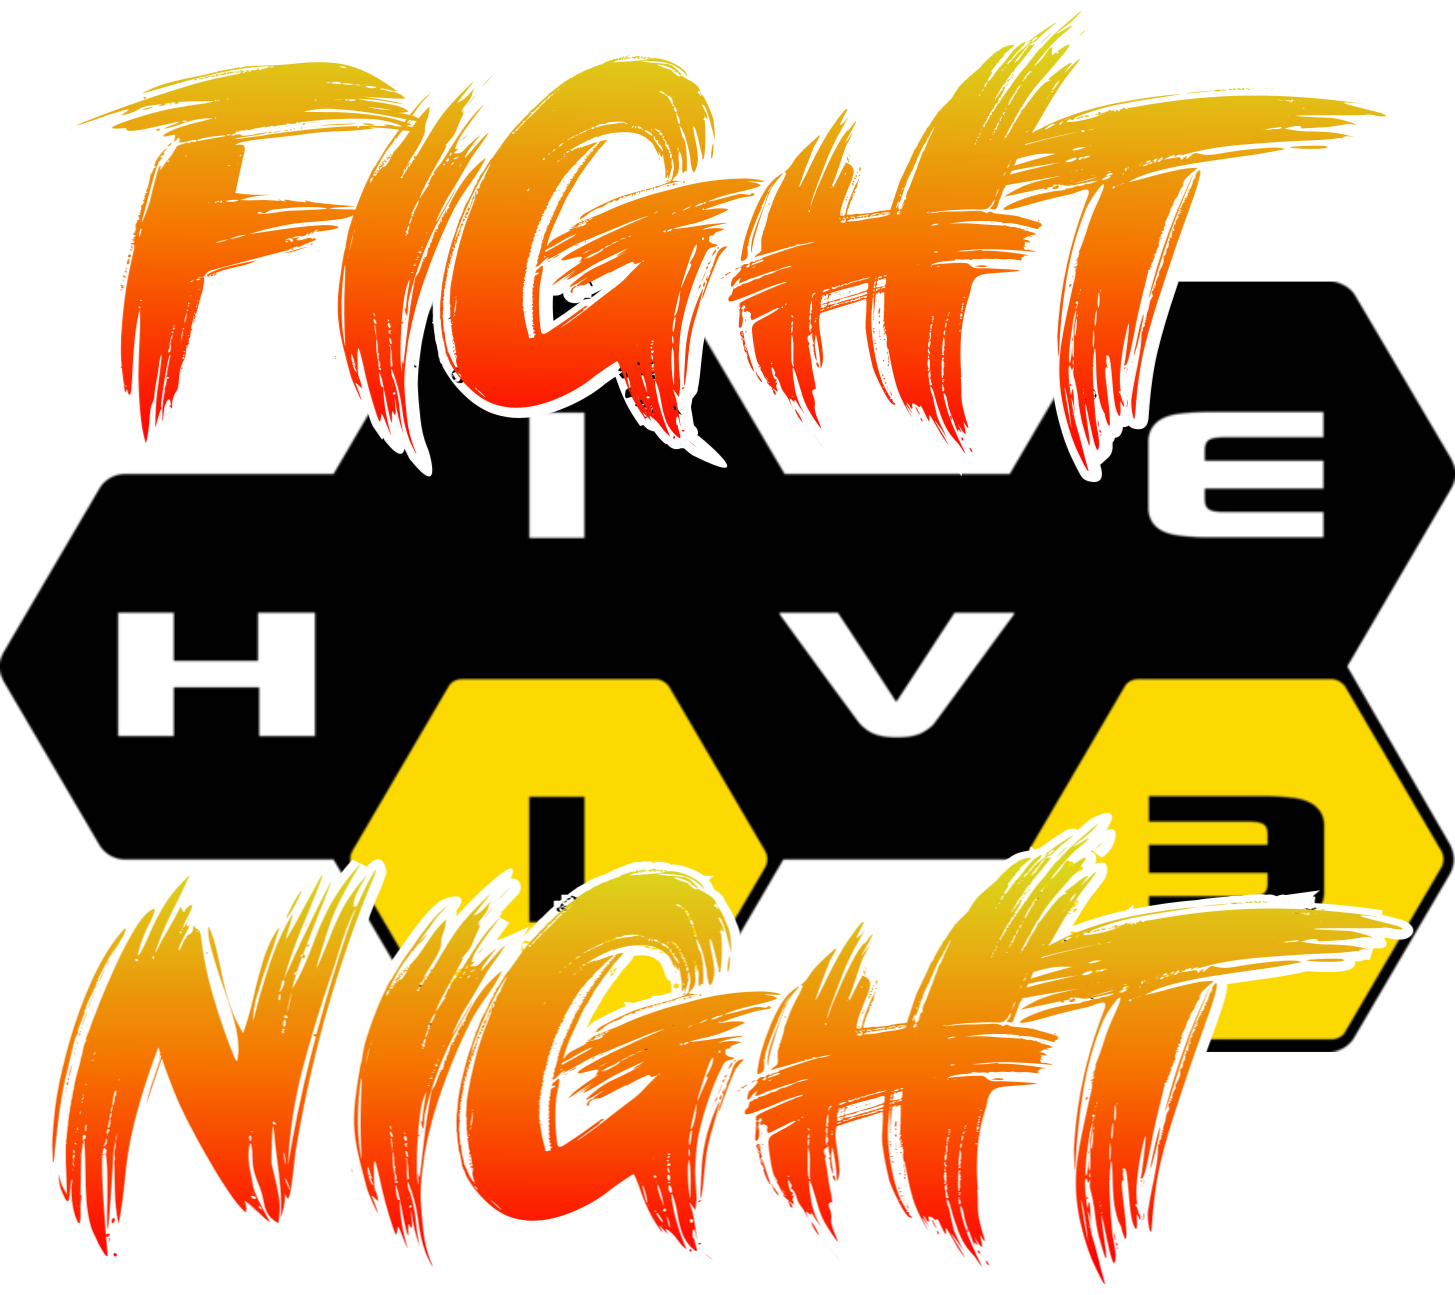 Tuesday Event: Hive13 Fight Night